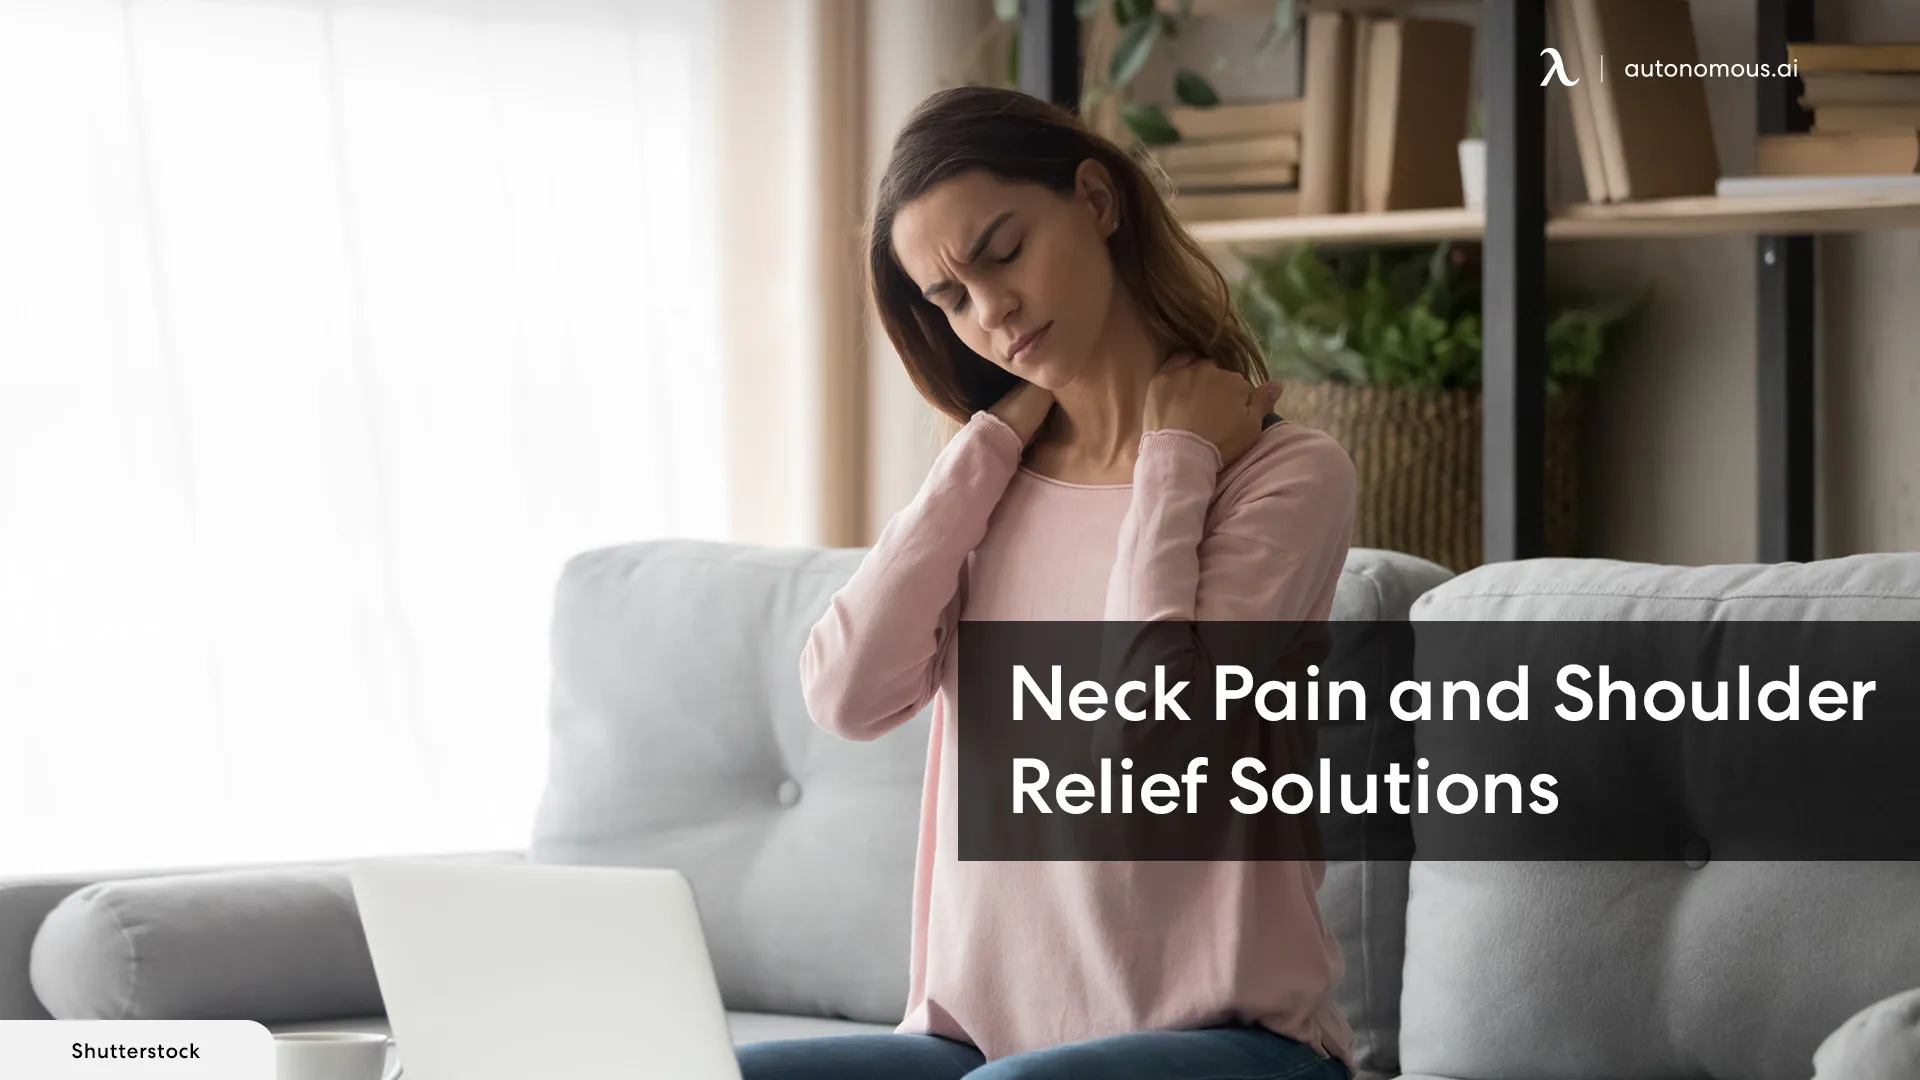 Fix Neck Pain Going Into Shoulder While Working From Home